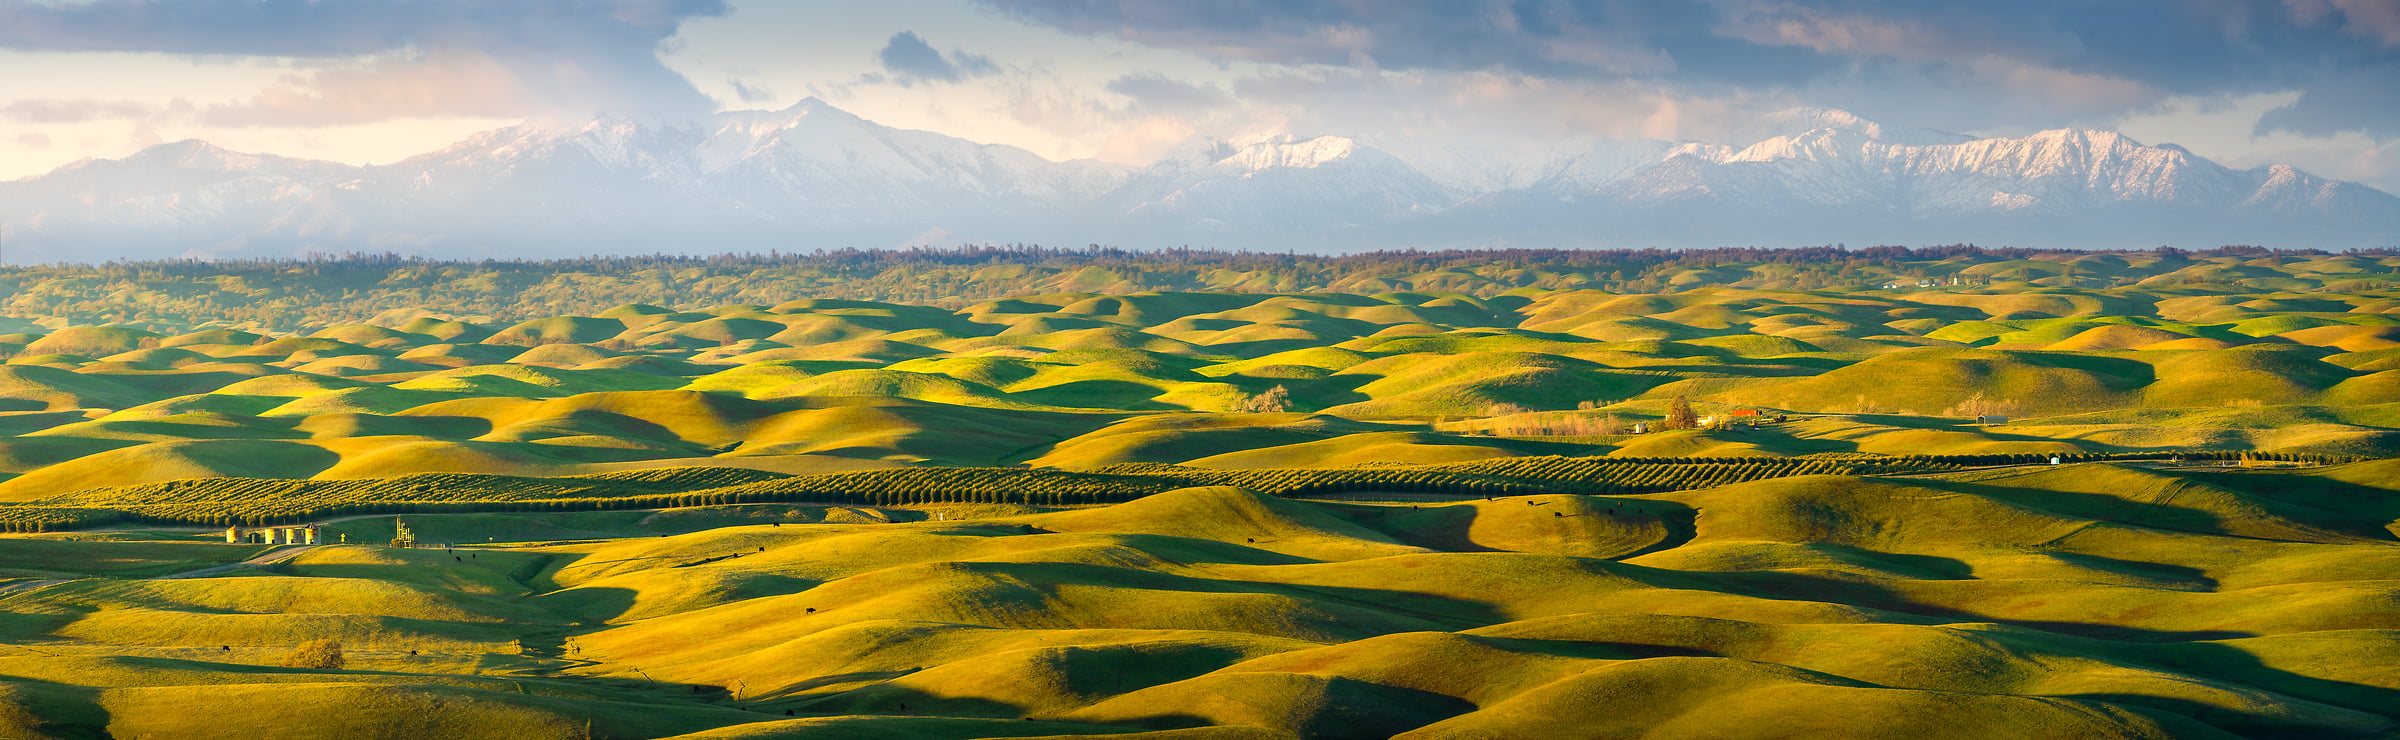 107 megapixels! A very high resolution, large-format VAST photo print of peaceful rolling hills with mountains in the background; landscape photograph created by Jeff Lewis in California